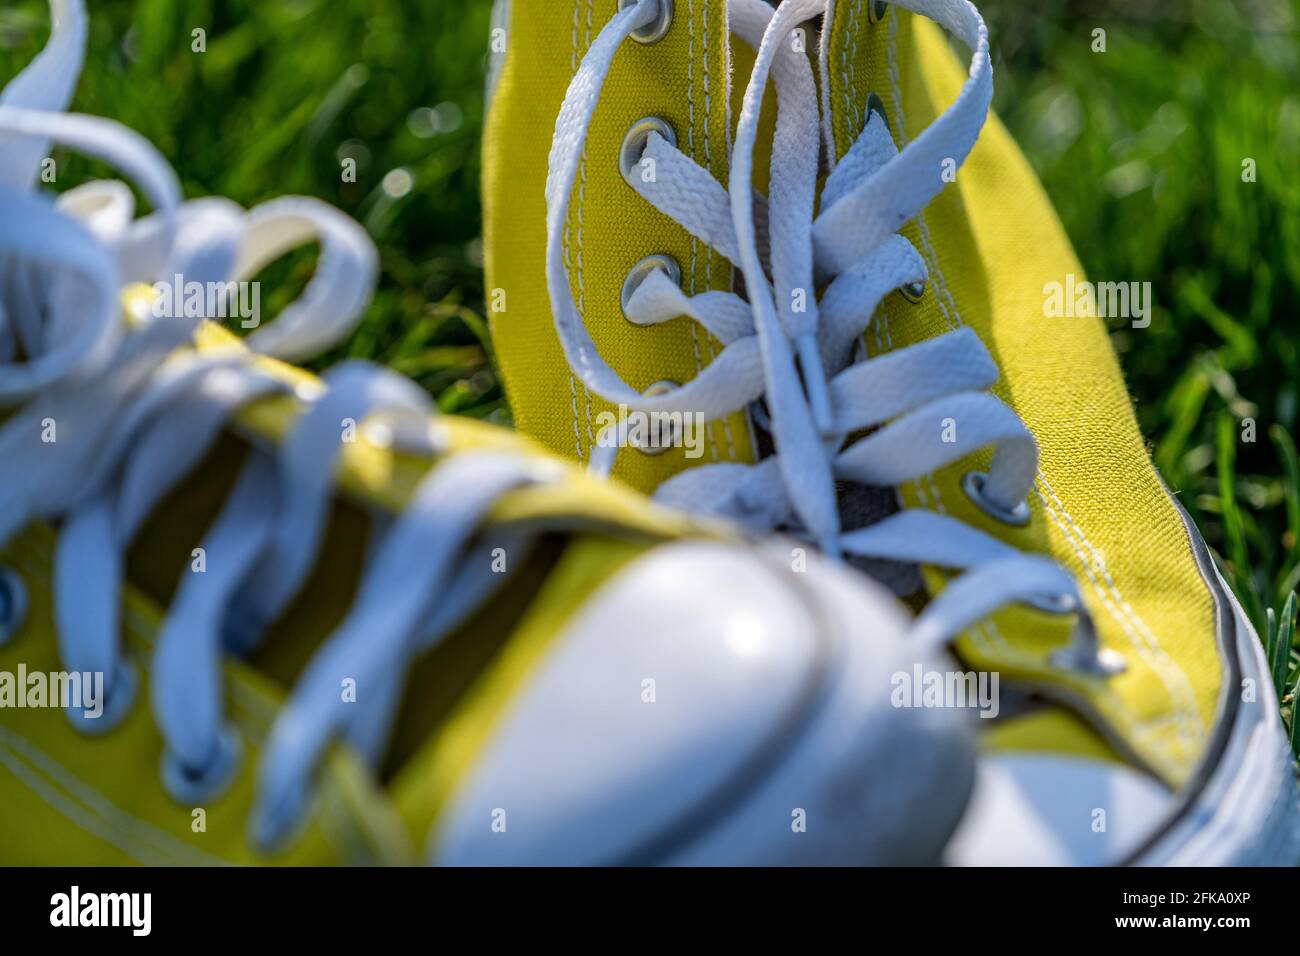 Yellow Chuck Taylor Converse All-Star sneakers on green grass in spring Stock Photo